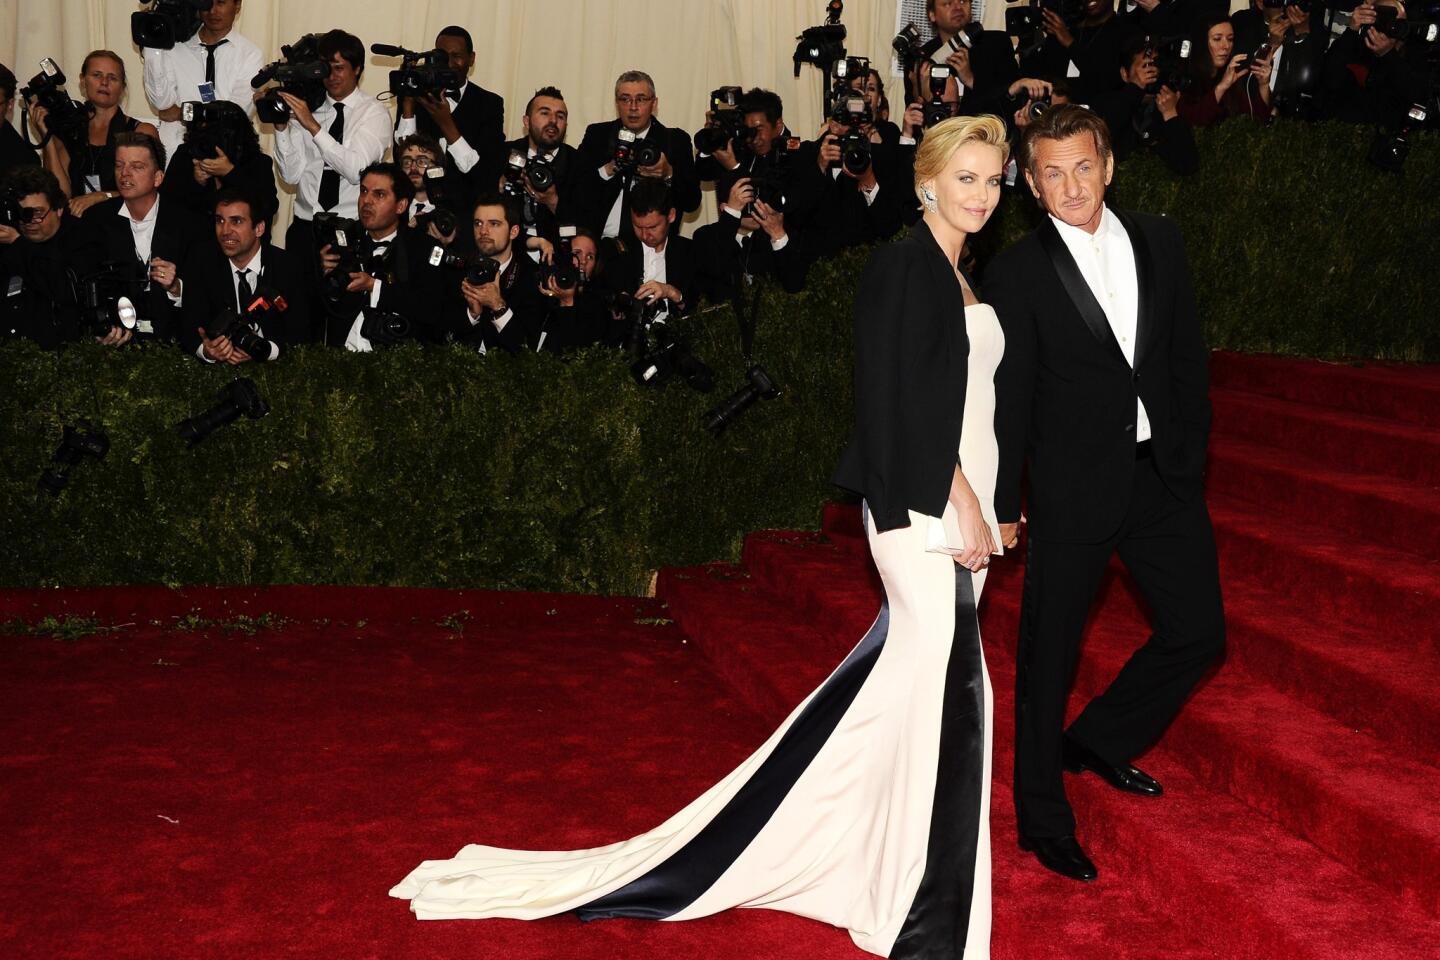 2014 Met Ball couples | Charlize Theron and Sean Penn